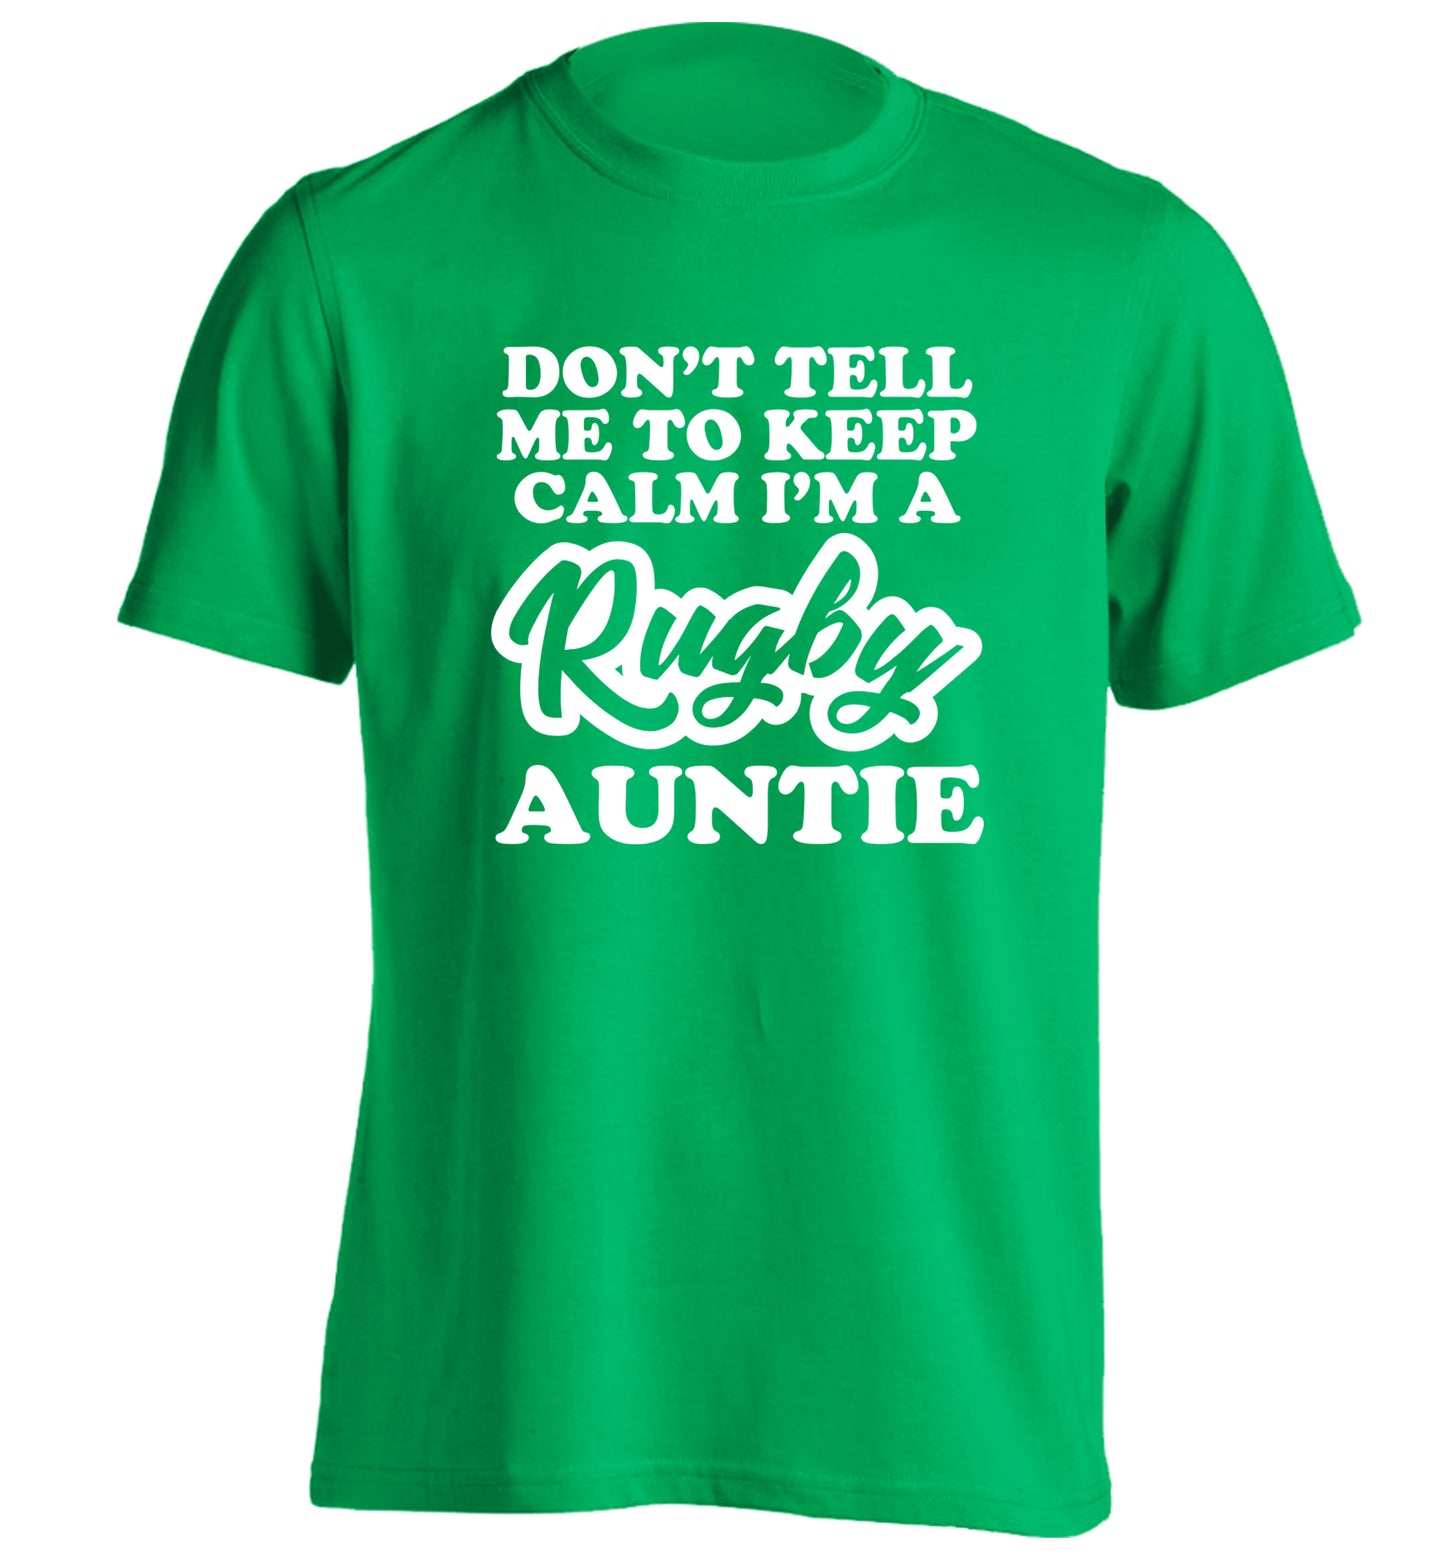 Don't tell me keep calm I'm a rugby auntie adults unisex green Tshirt 2XL